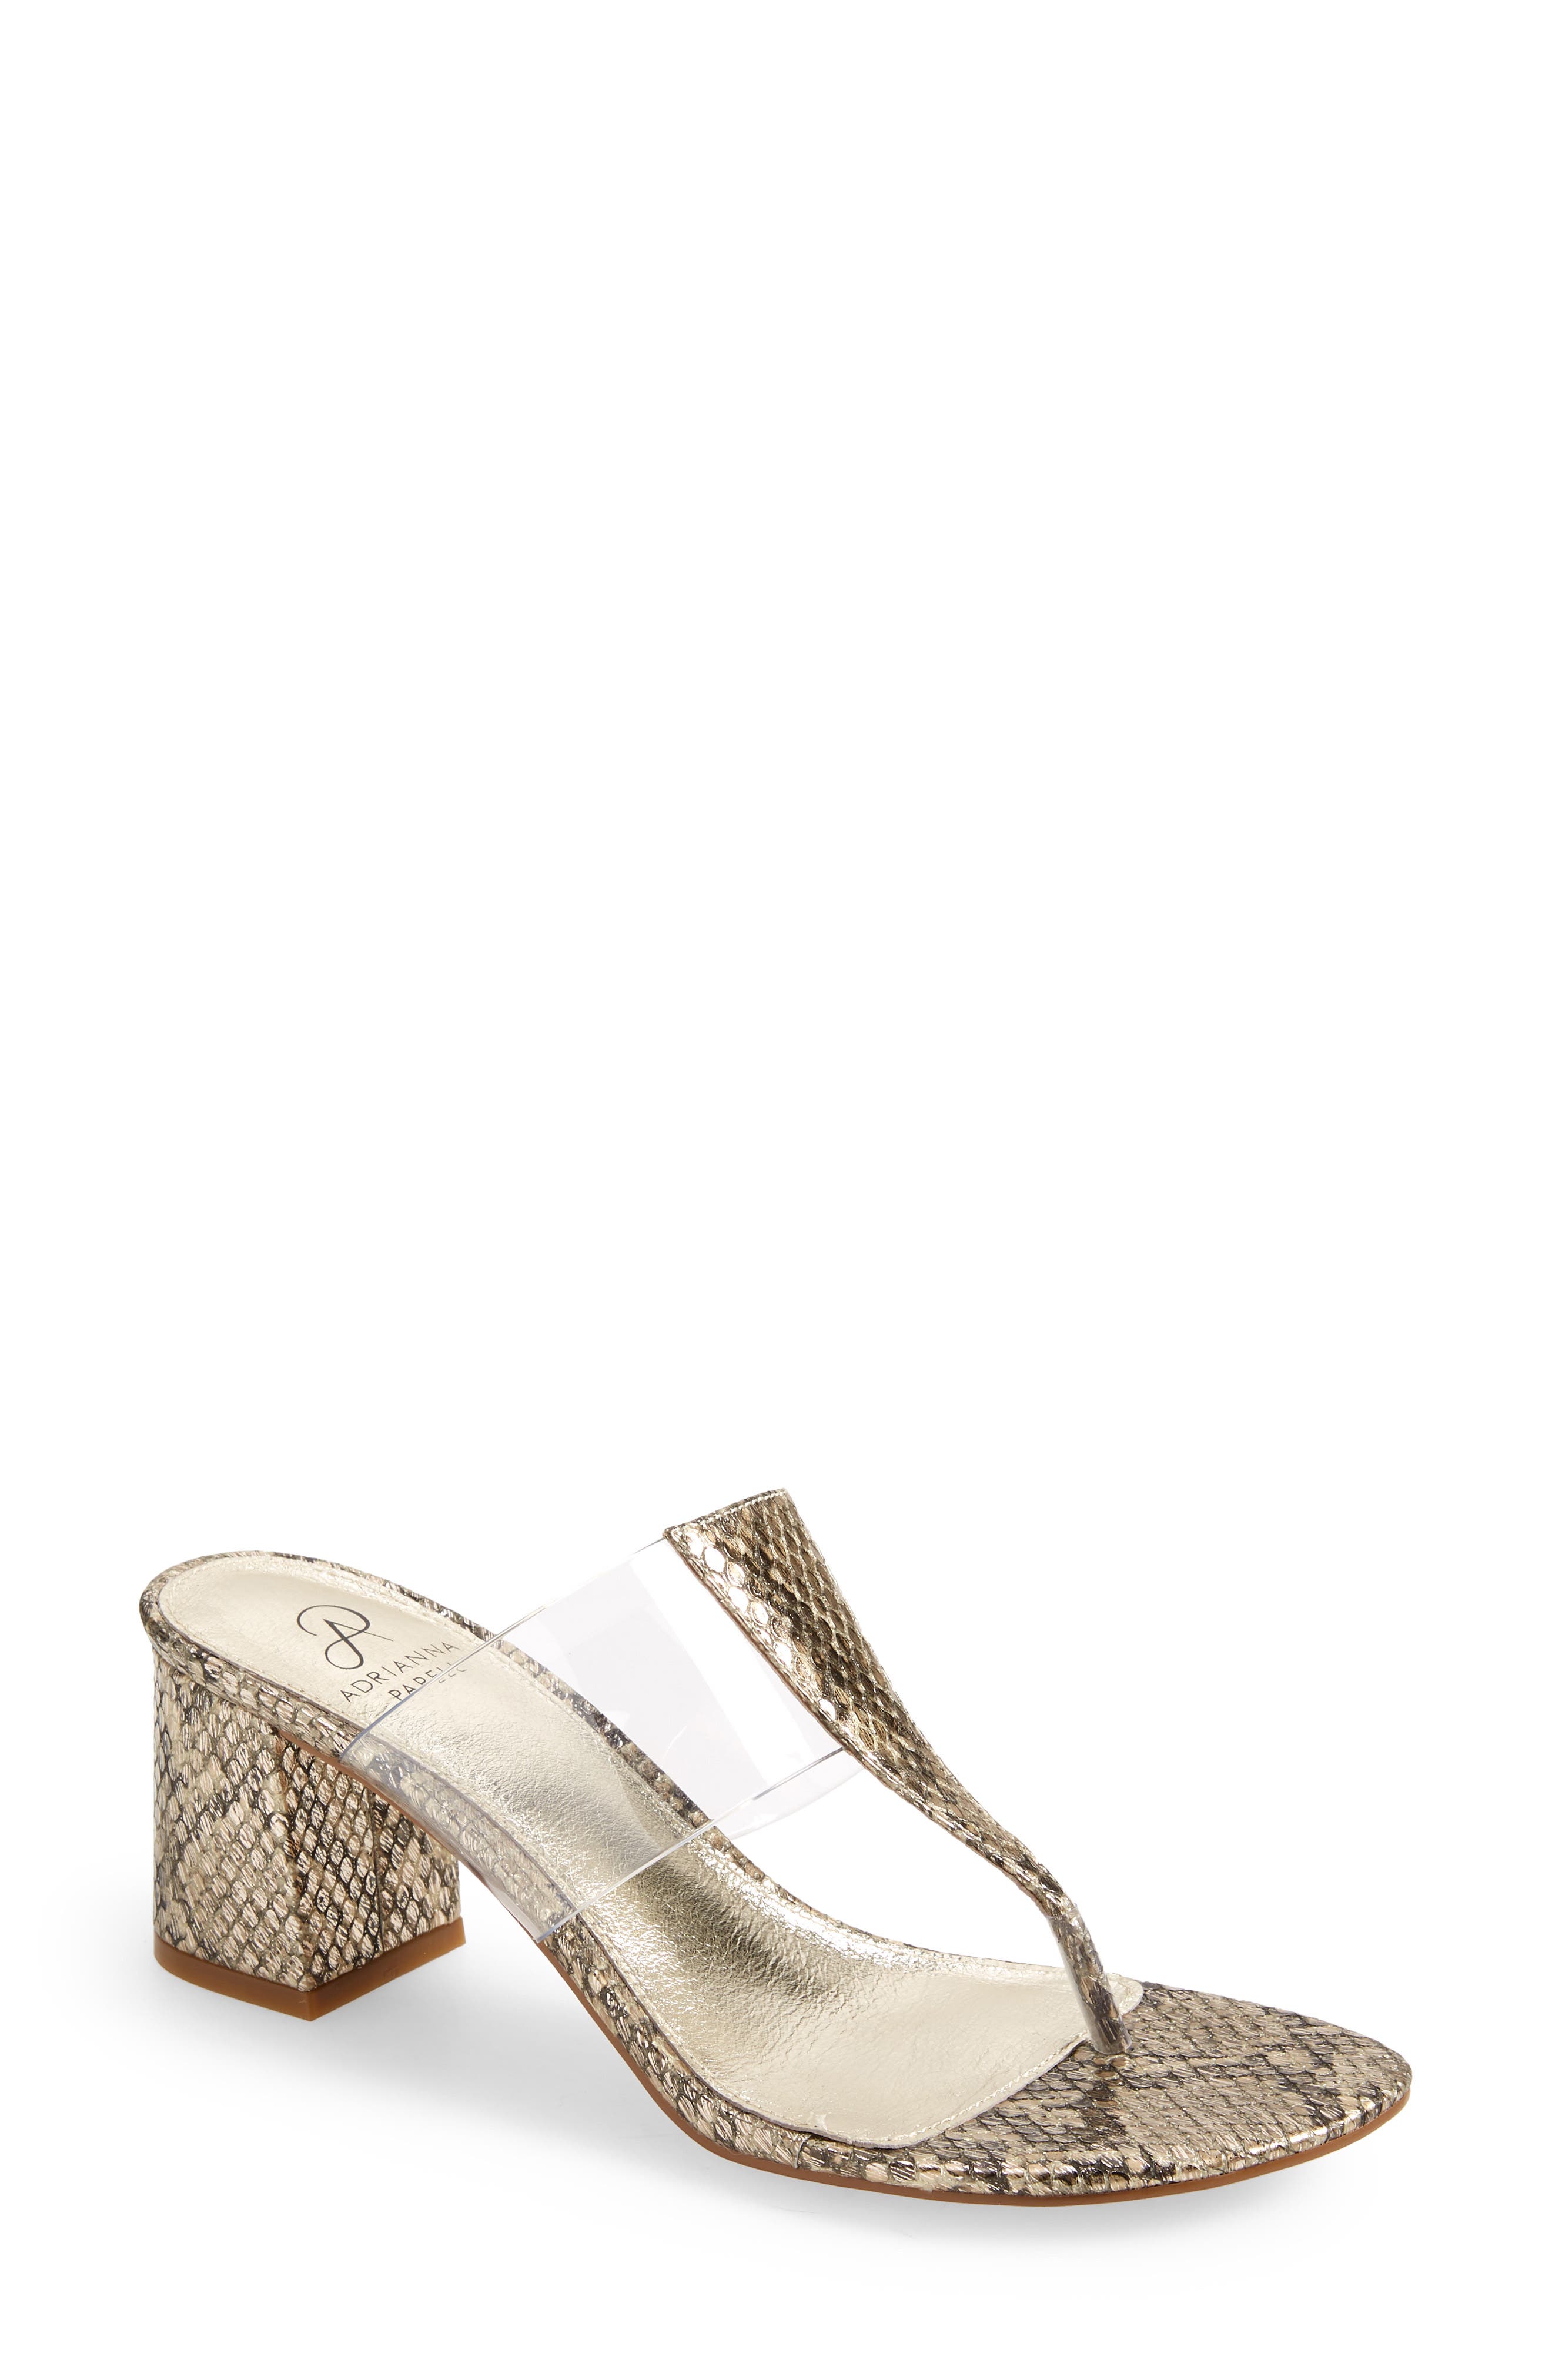 nordstrom adrianna papell shoes